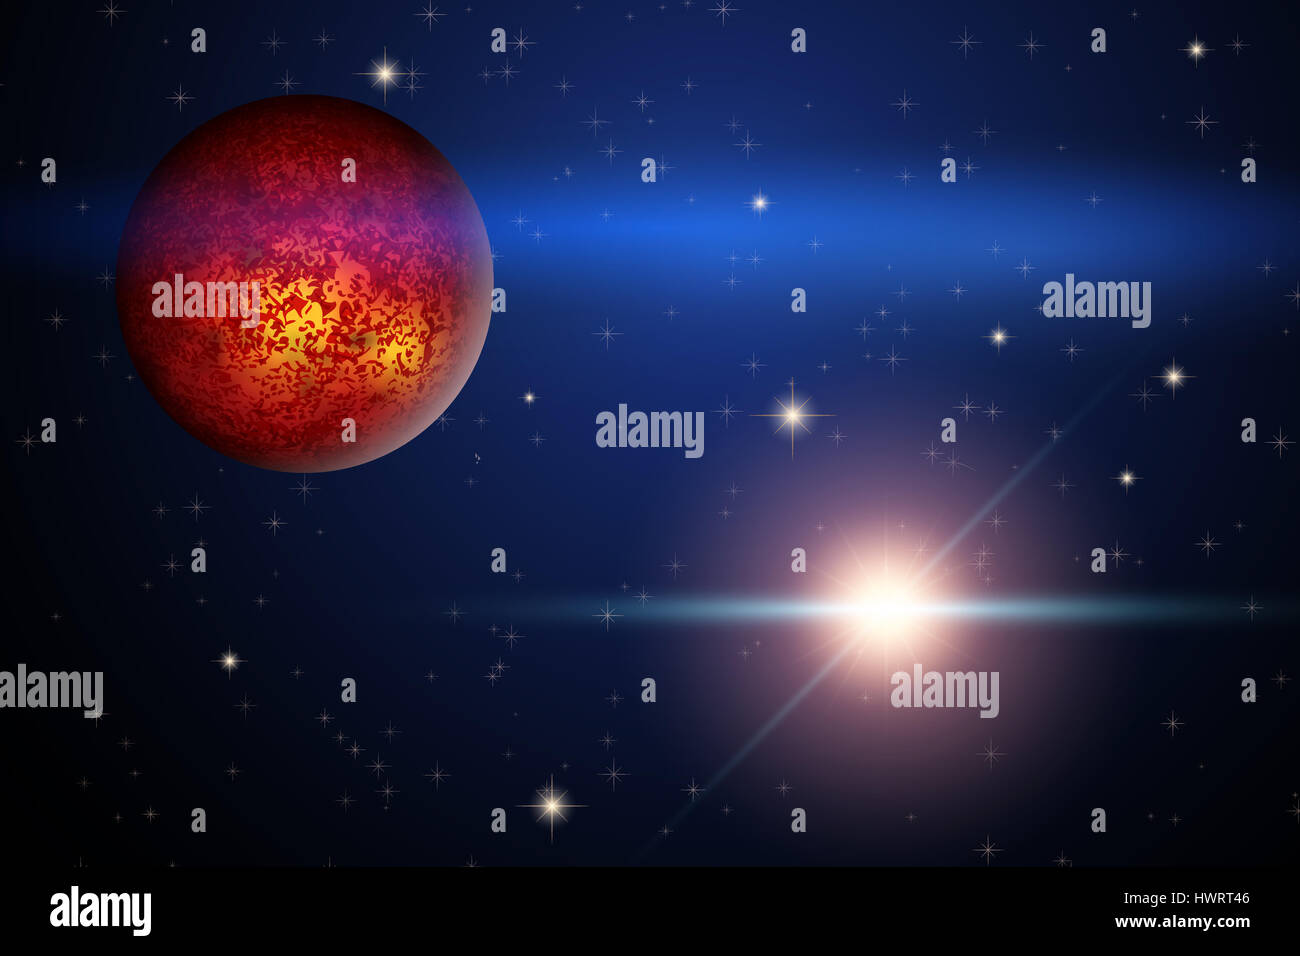 The Planet Mars and bright star in space. Abstract scientific background. Stock Photo